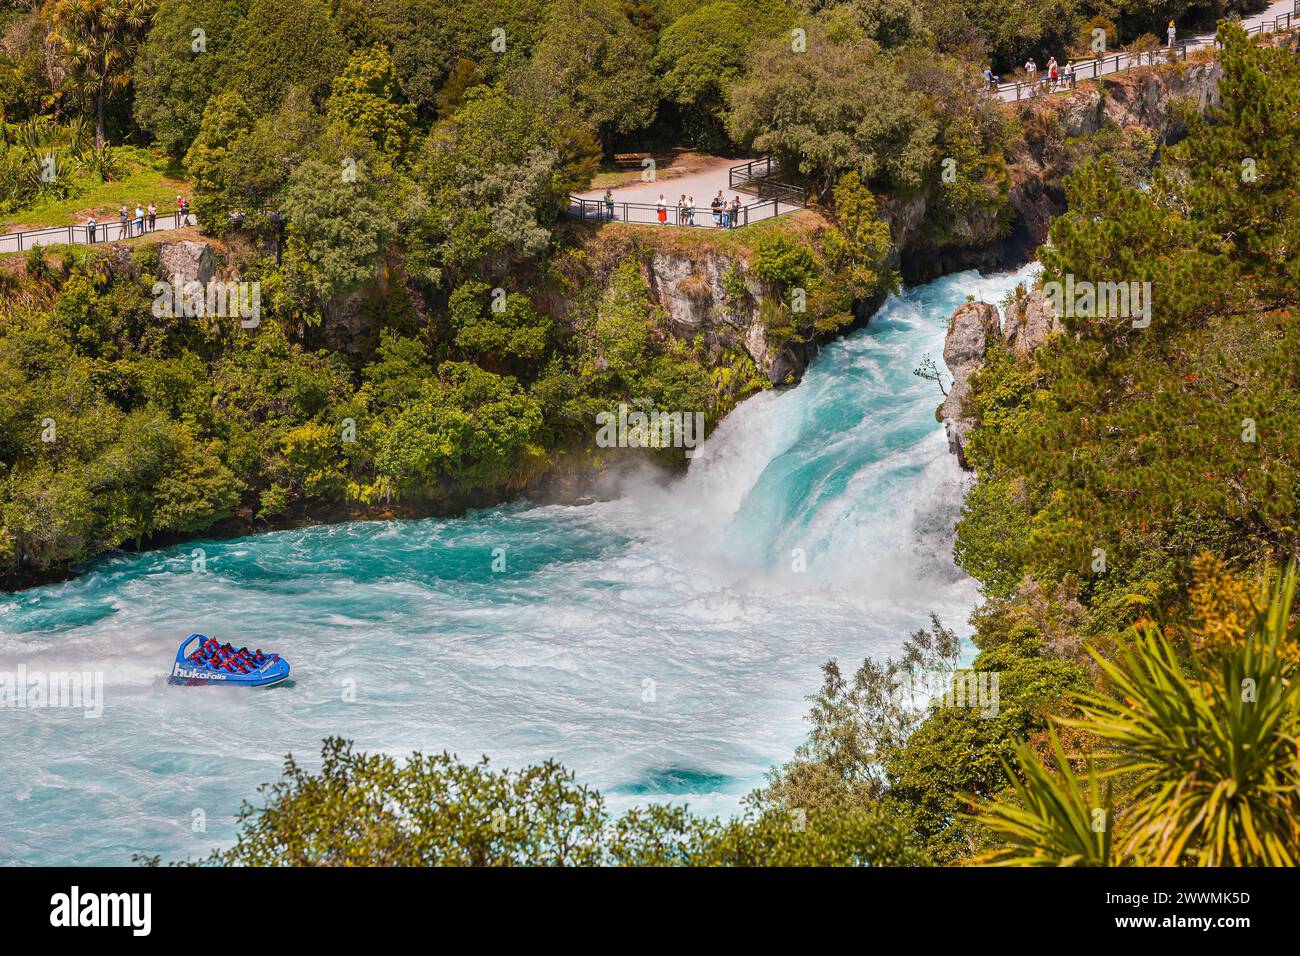 A group of people standing and looking on a Jet boat at the Huka Falls, a set of waterfalls on the Waikato River, which drains Lake Taupo, on the Nort Stock Photo